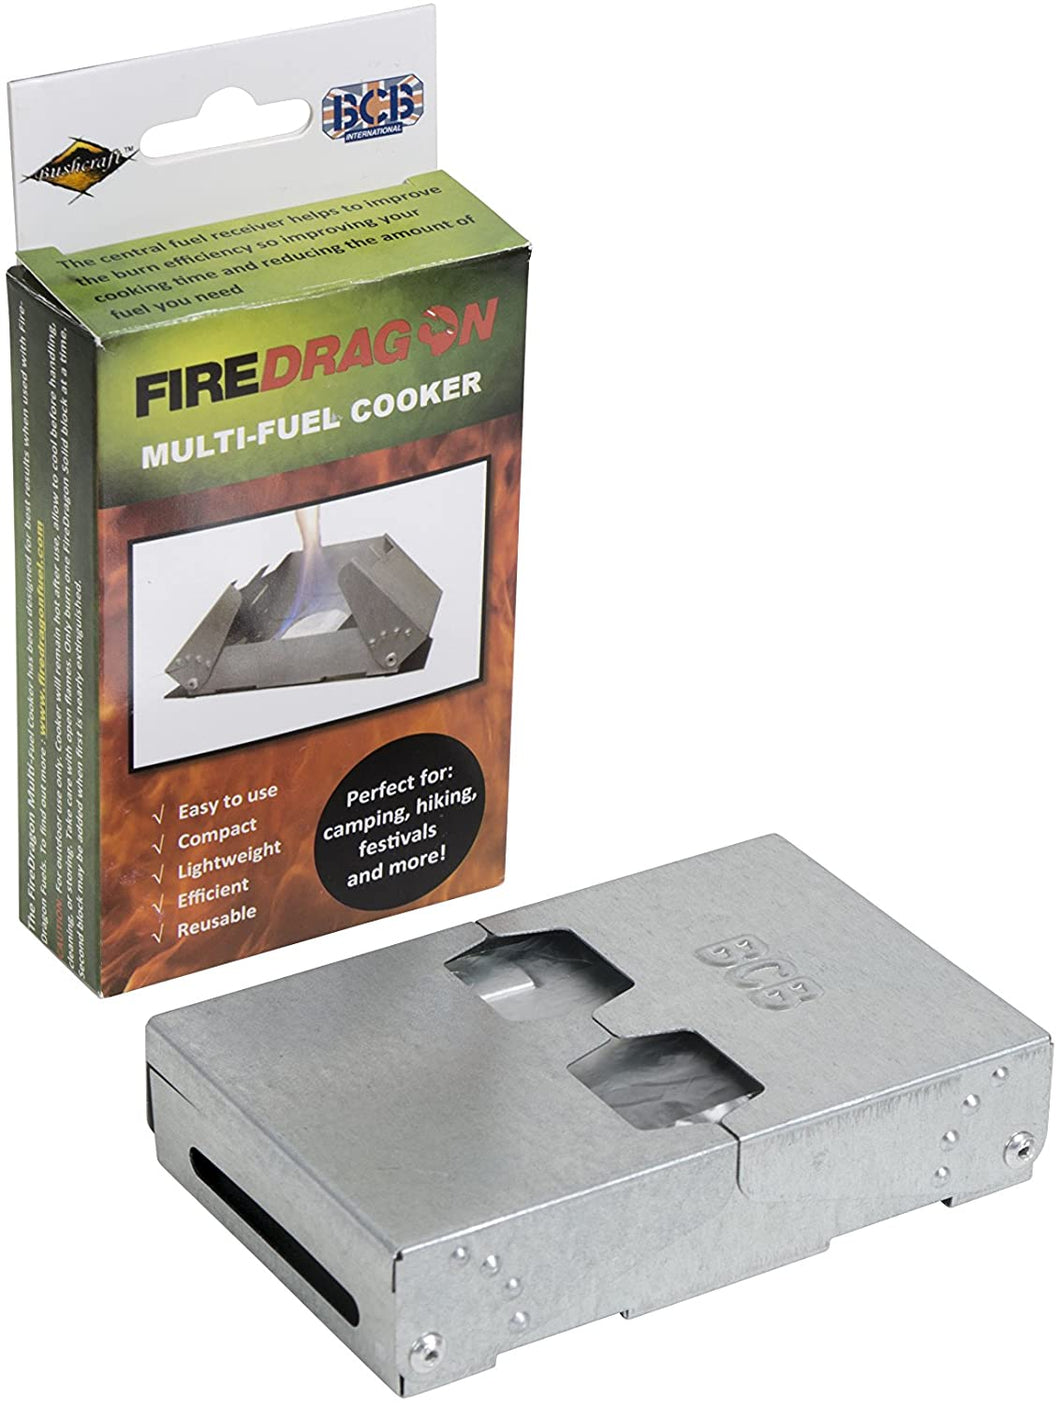 British Army issue Fire Dragon BCB camping stove